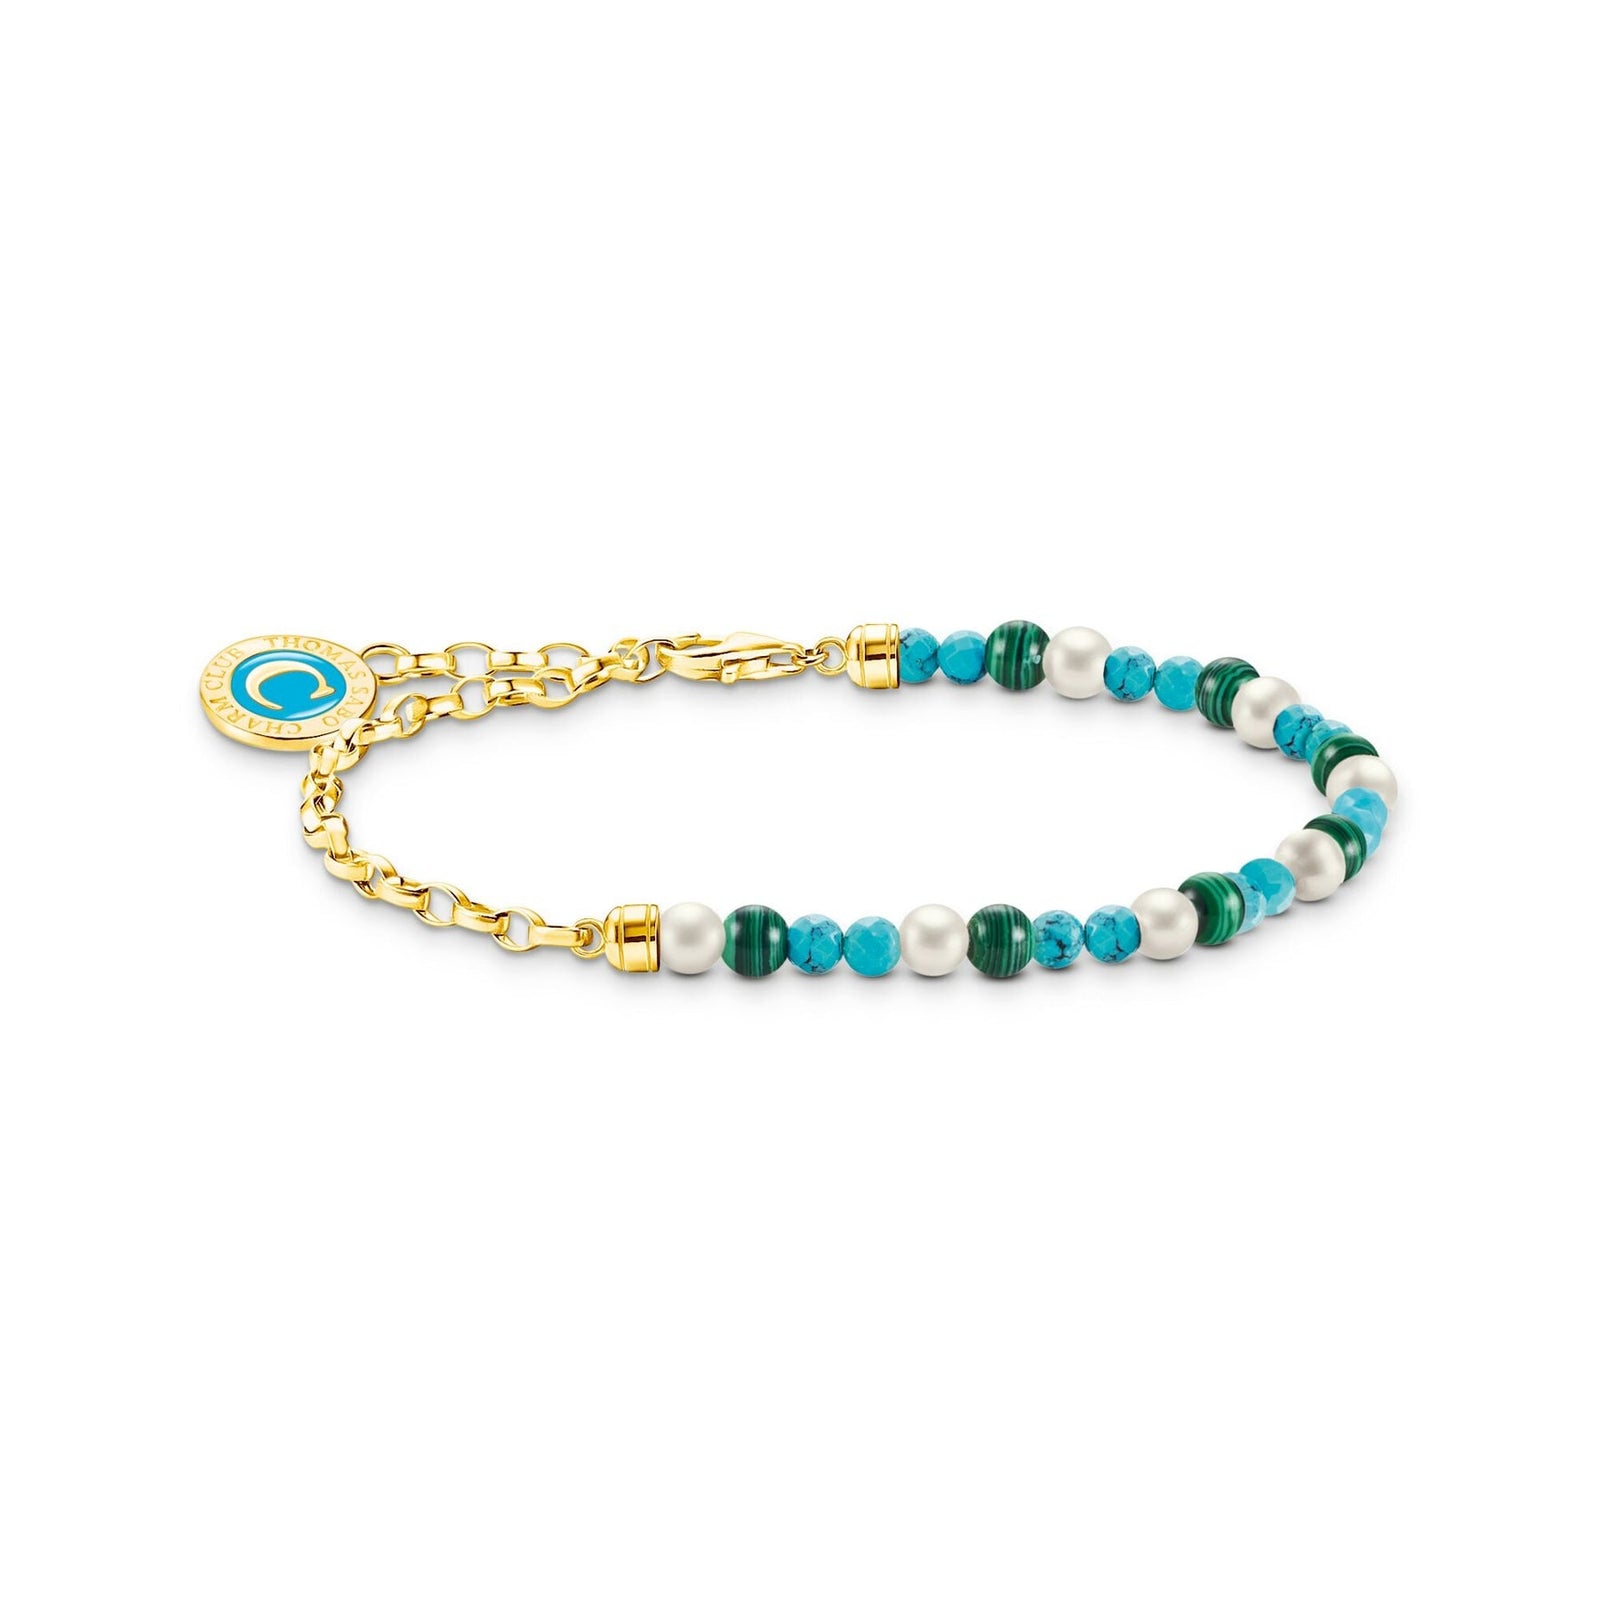 Thomas Sabo Bracelet With Pearls, Malachite And Charmista Disc Gold Plated 19cm